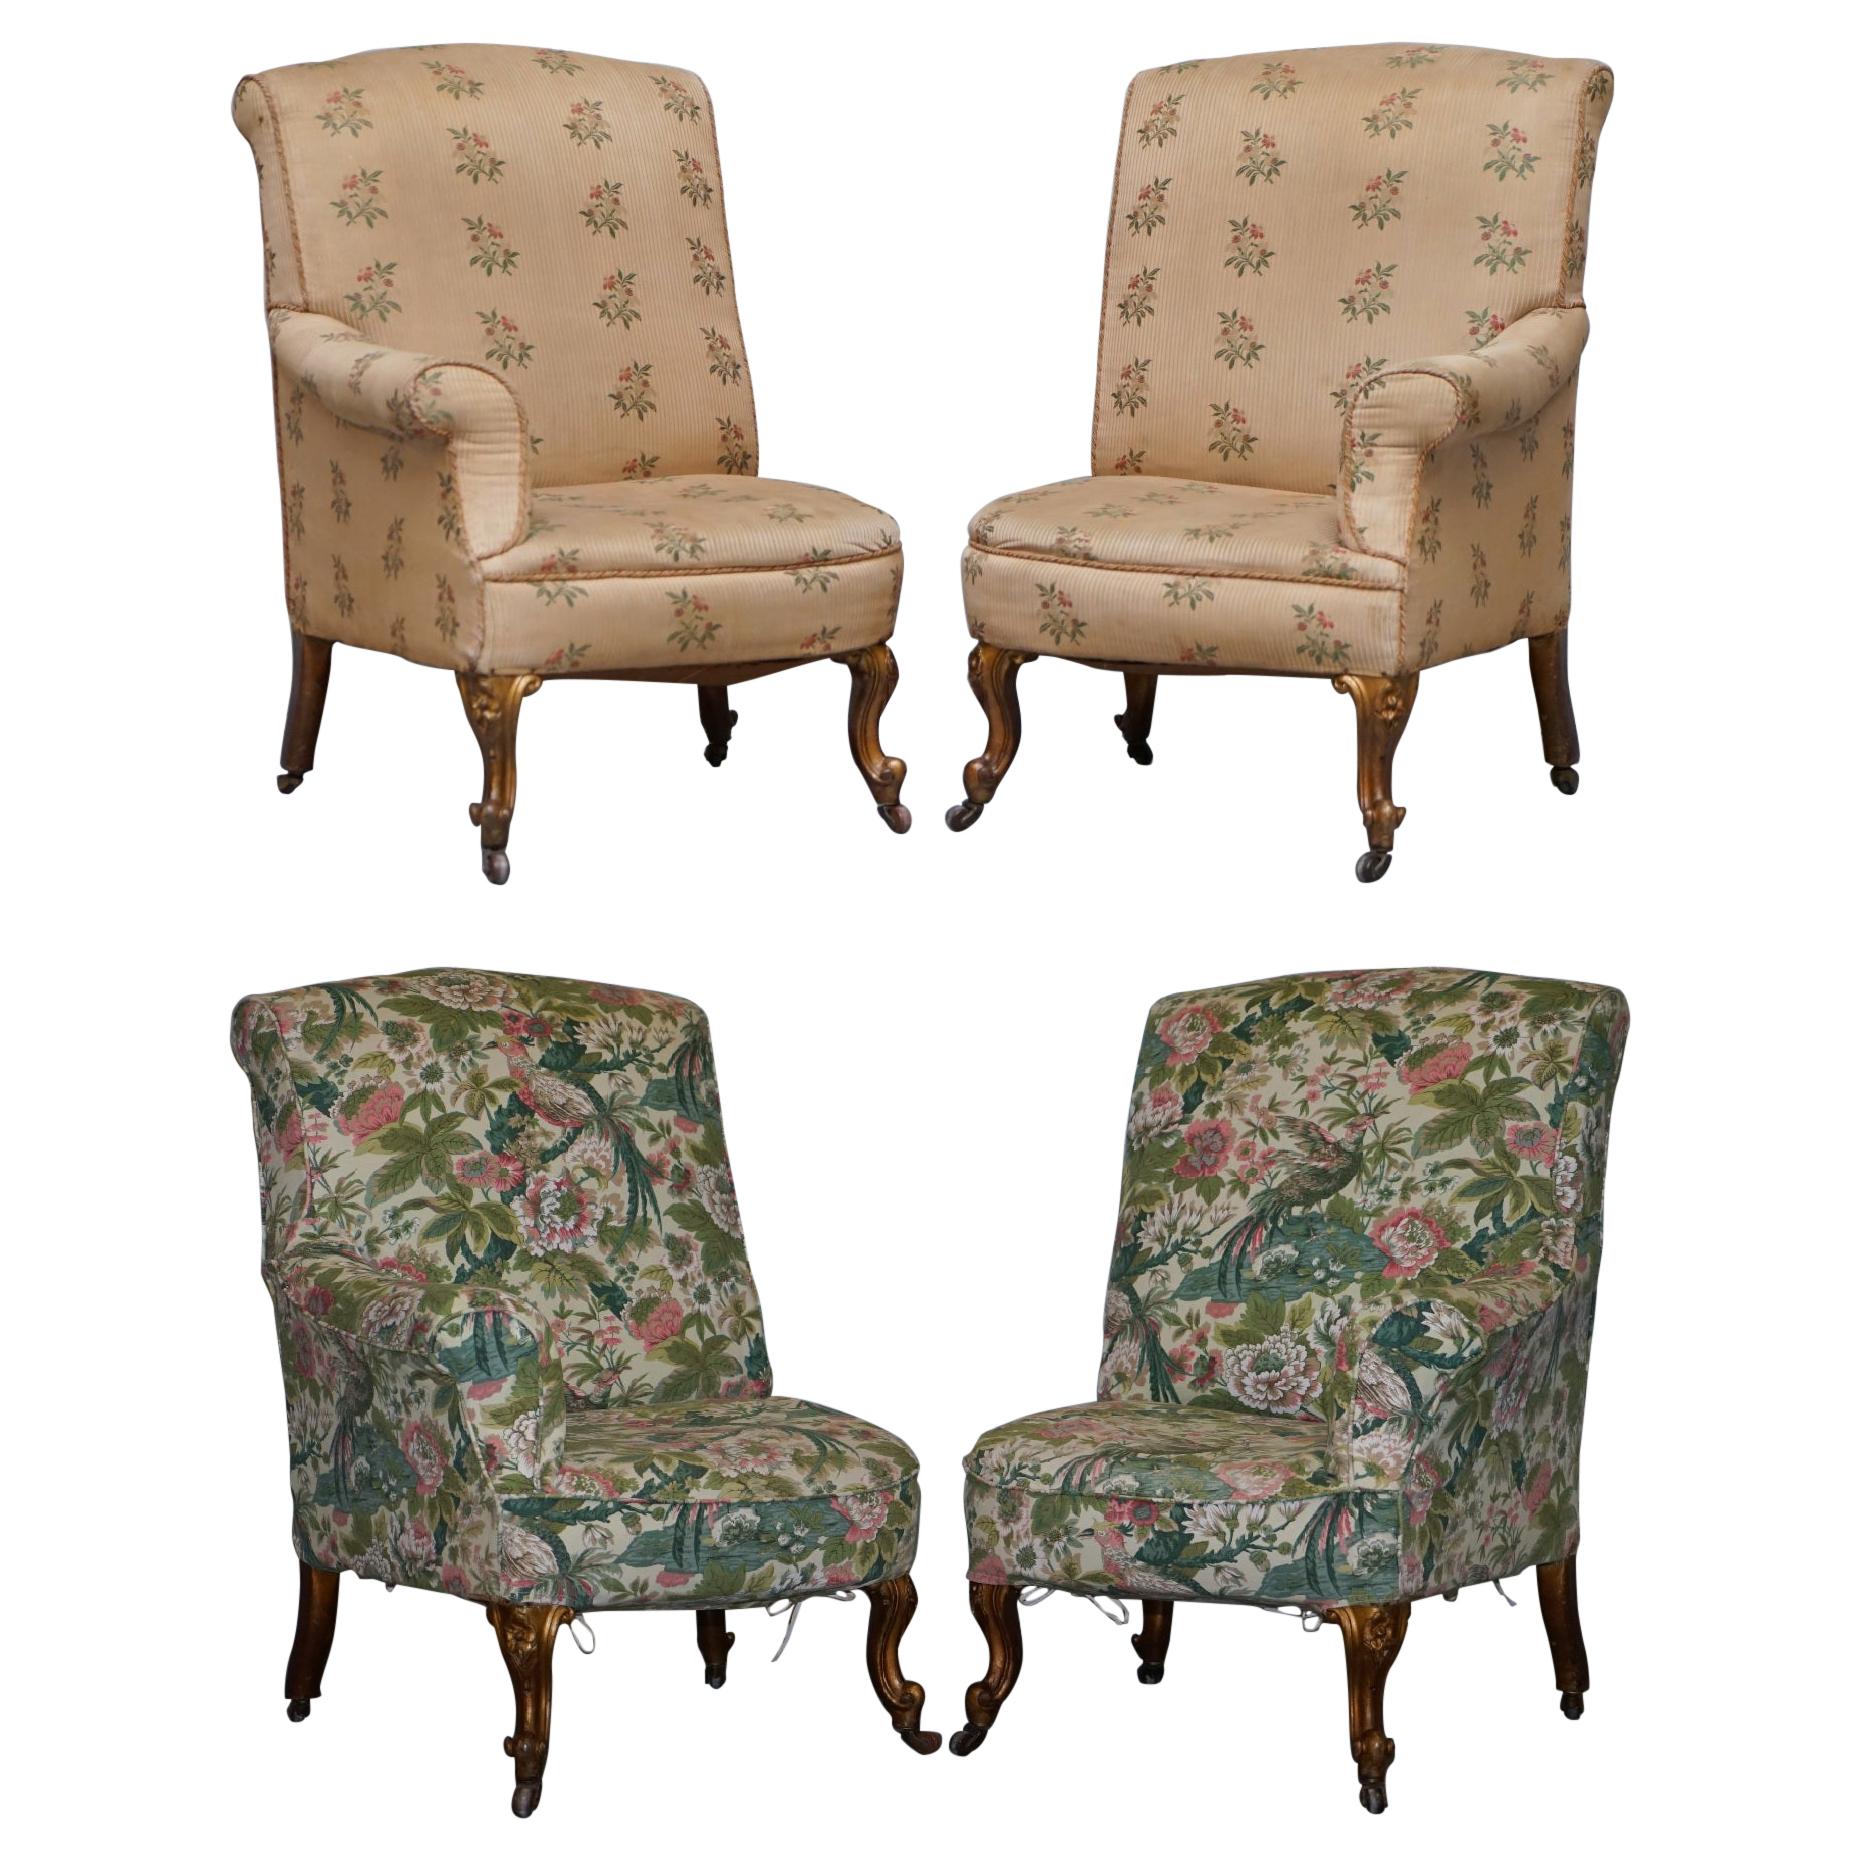 Rare Pair of Giltwood Victorian Asymmetrical Armchairs Embroidered Bird Covers For Sale